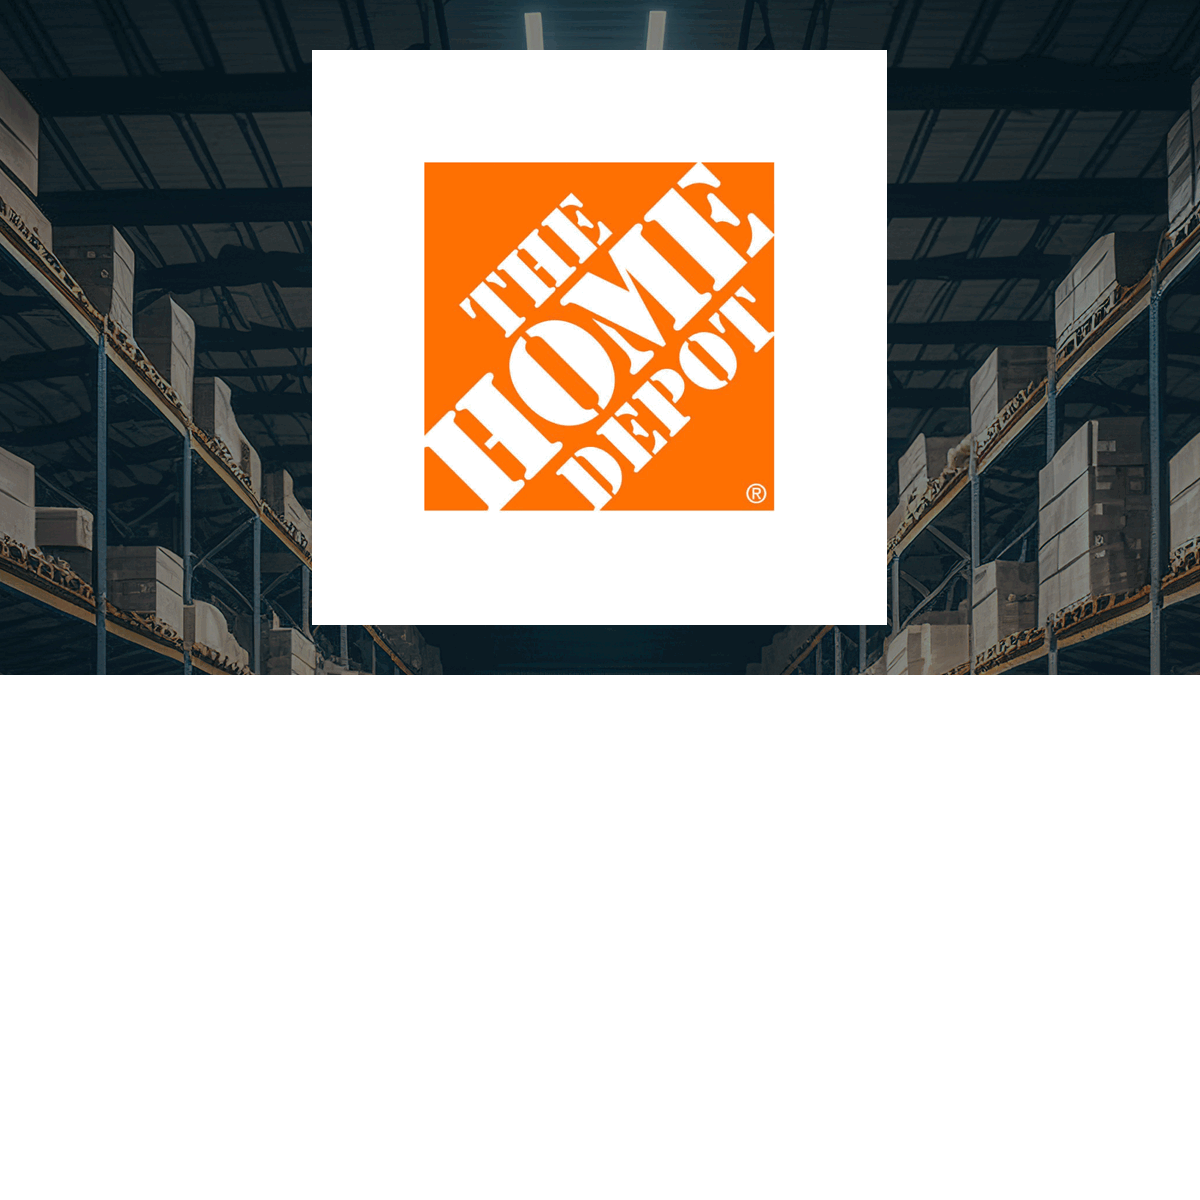 Home Depot logo with Retail/Wholesale background